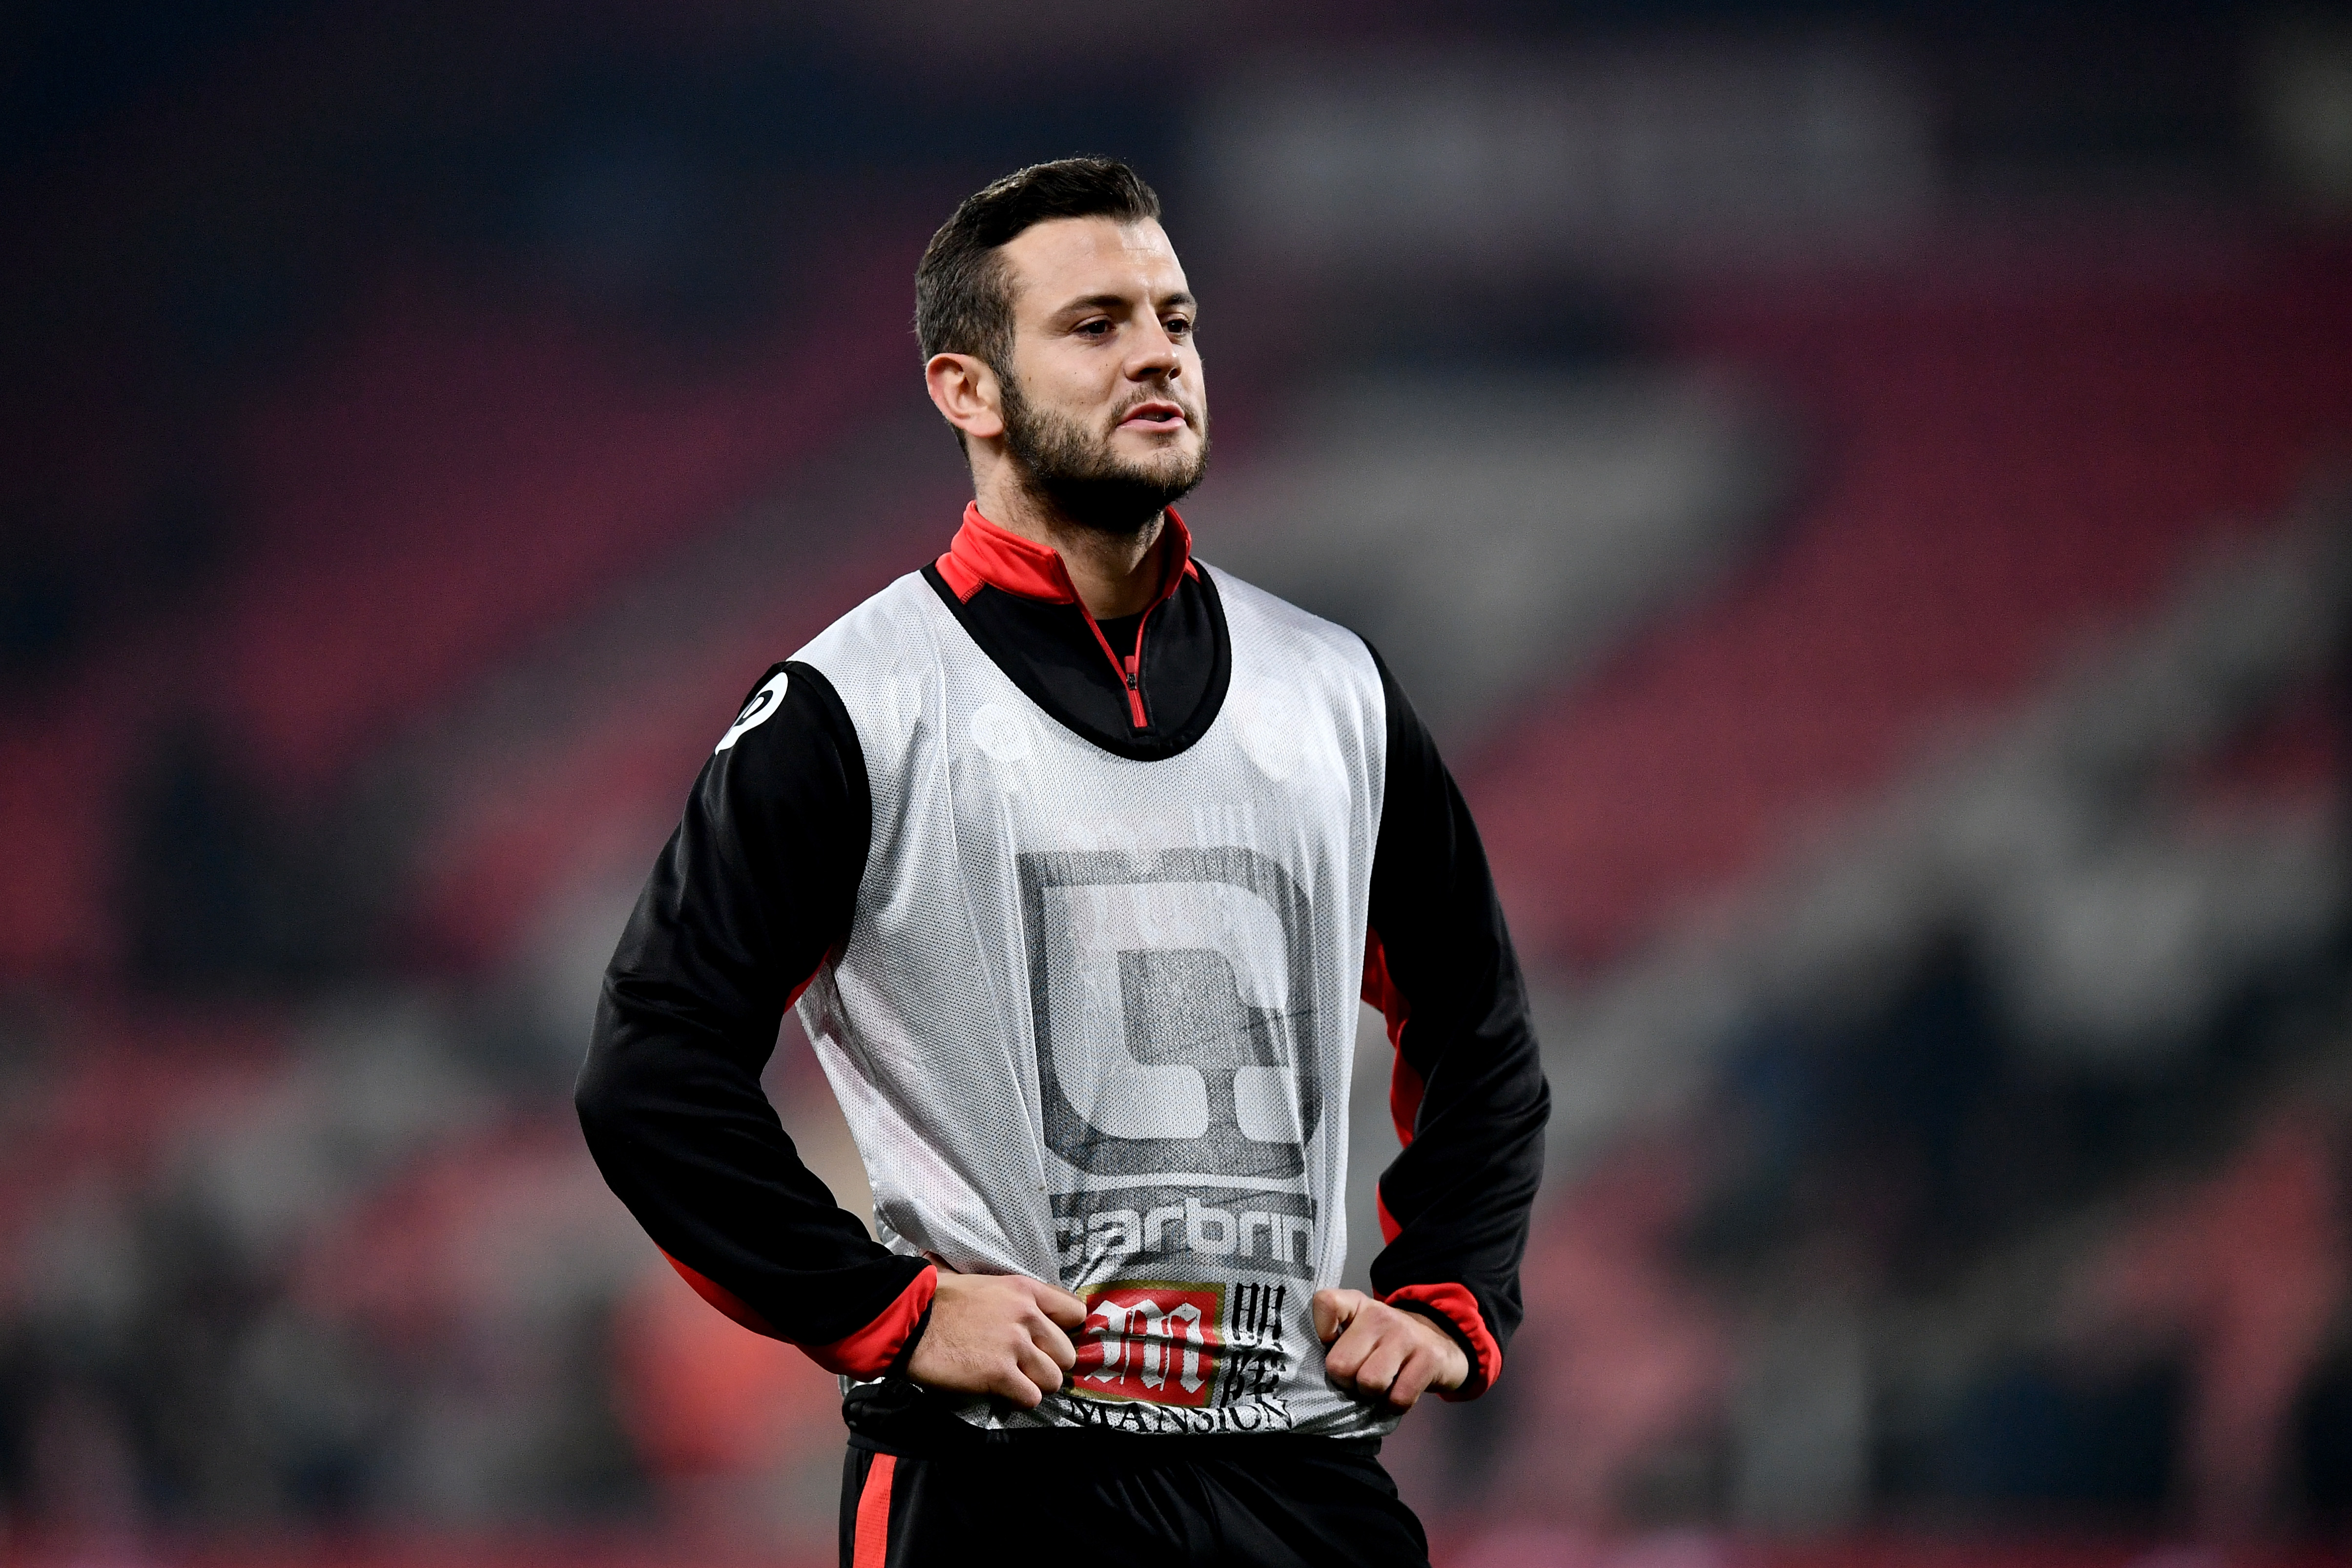 BOURNEMOUTH, ENGLAND - DECEMBER 13:  Jack Wilshere of AFC Bournemouth warms up prior to kickoff during the Premier League match between AFC Bournemouth and Leicester City at the Vitality Stadium on December 13, 2016 in Bournemouth, England.  (Photo by Dan Mullan/Getty Images)